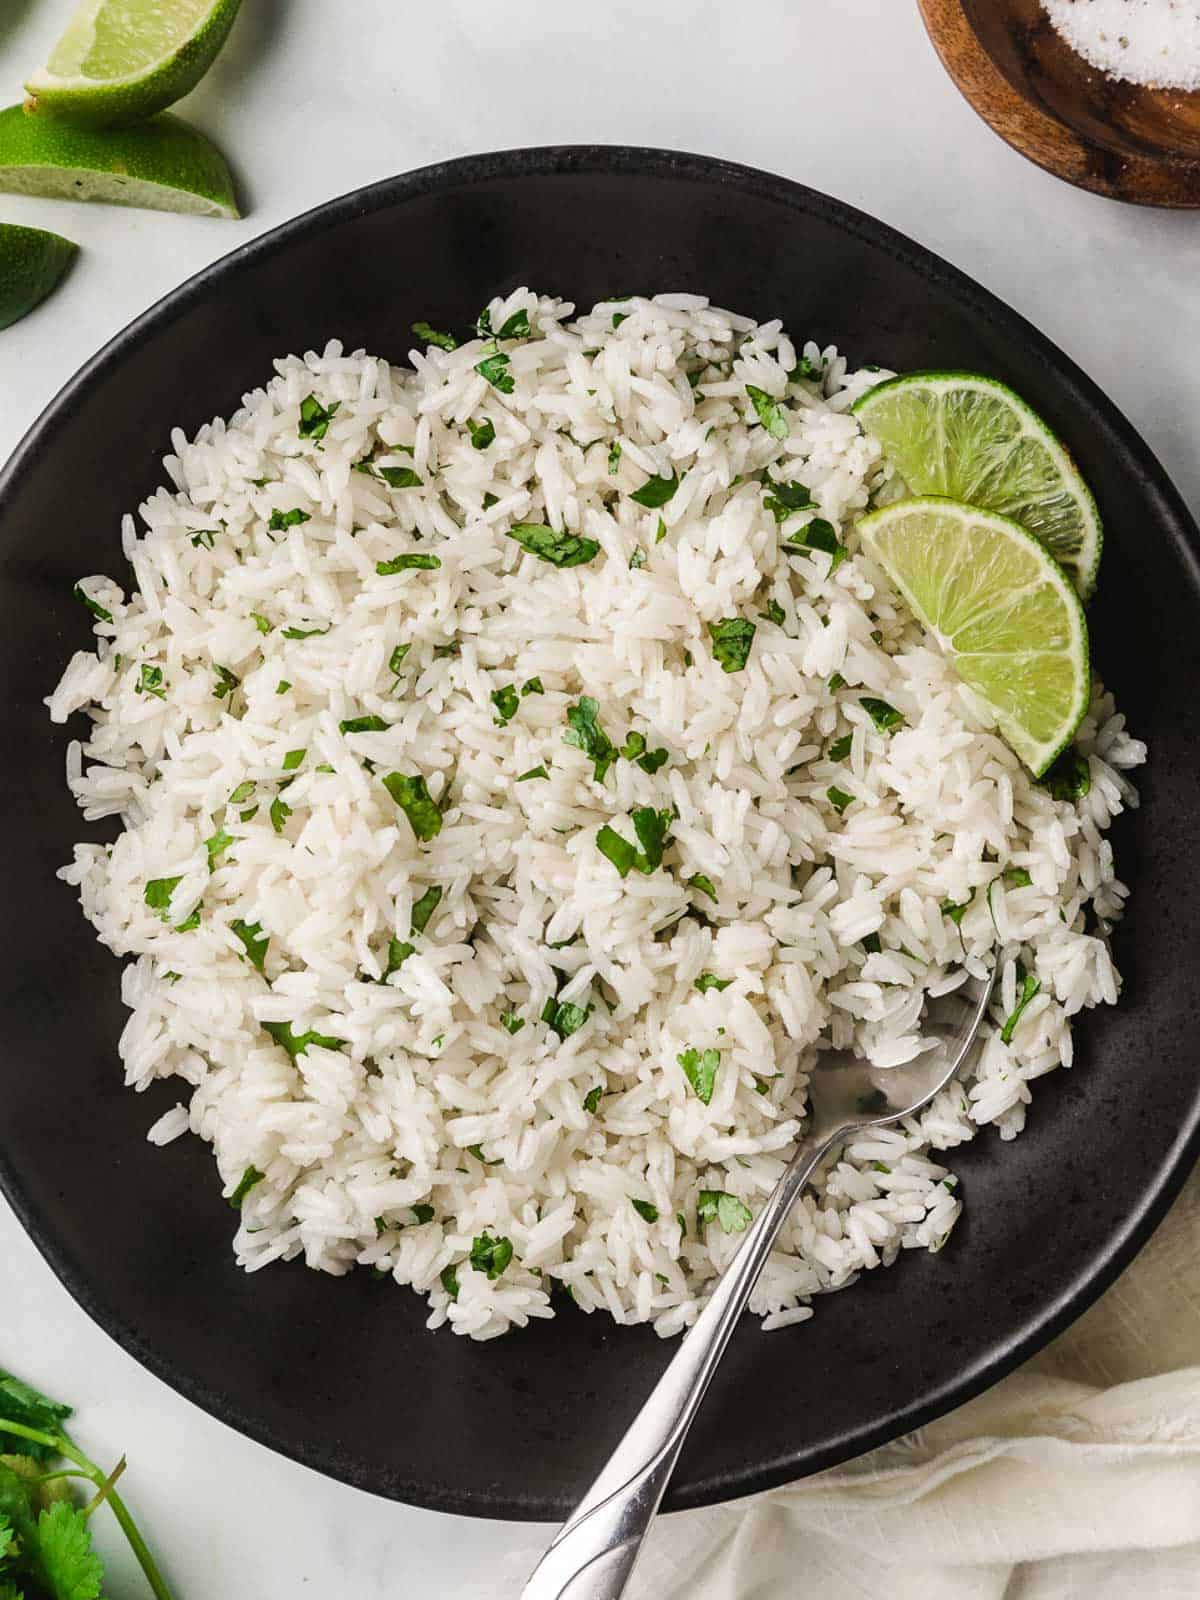 Cilantro lime rice in a bowl with a fork.